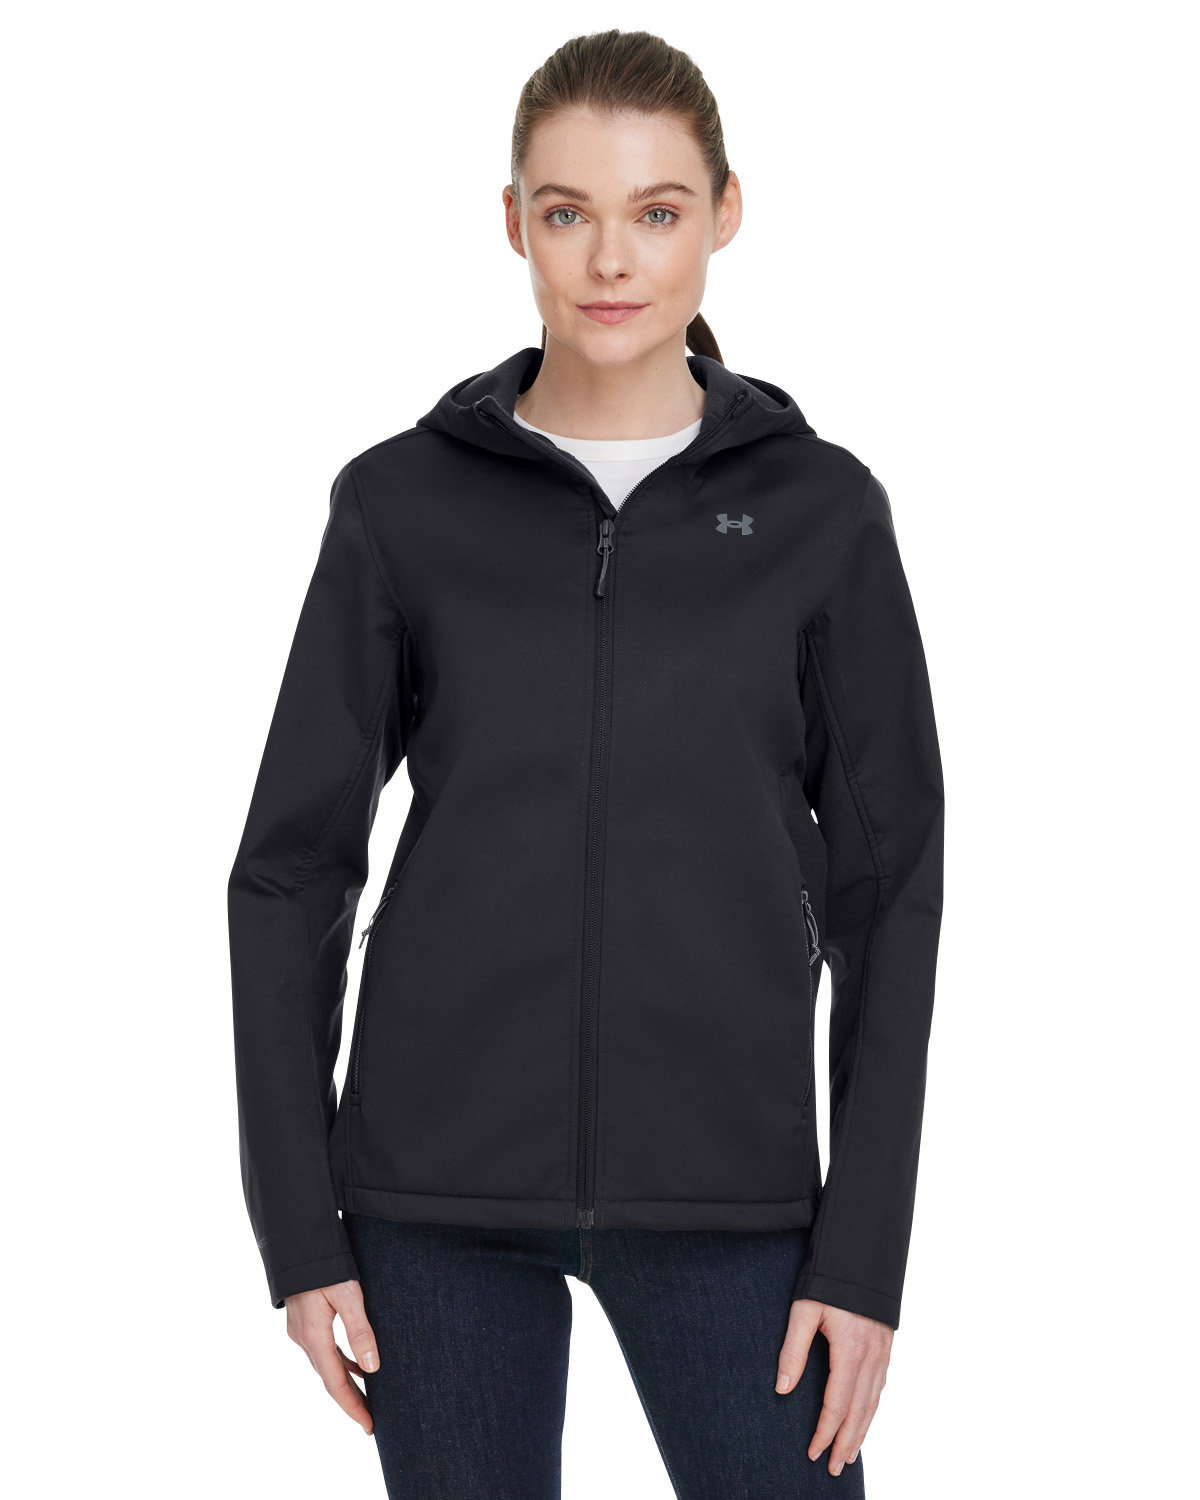 Under Armour ColdGear Infrared Track Jackets for Women